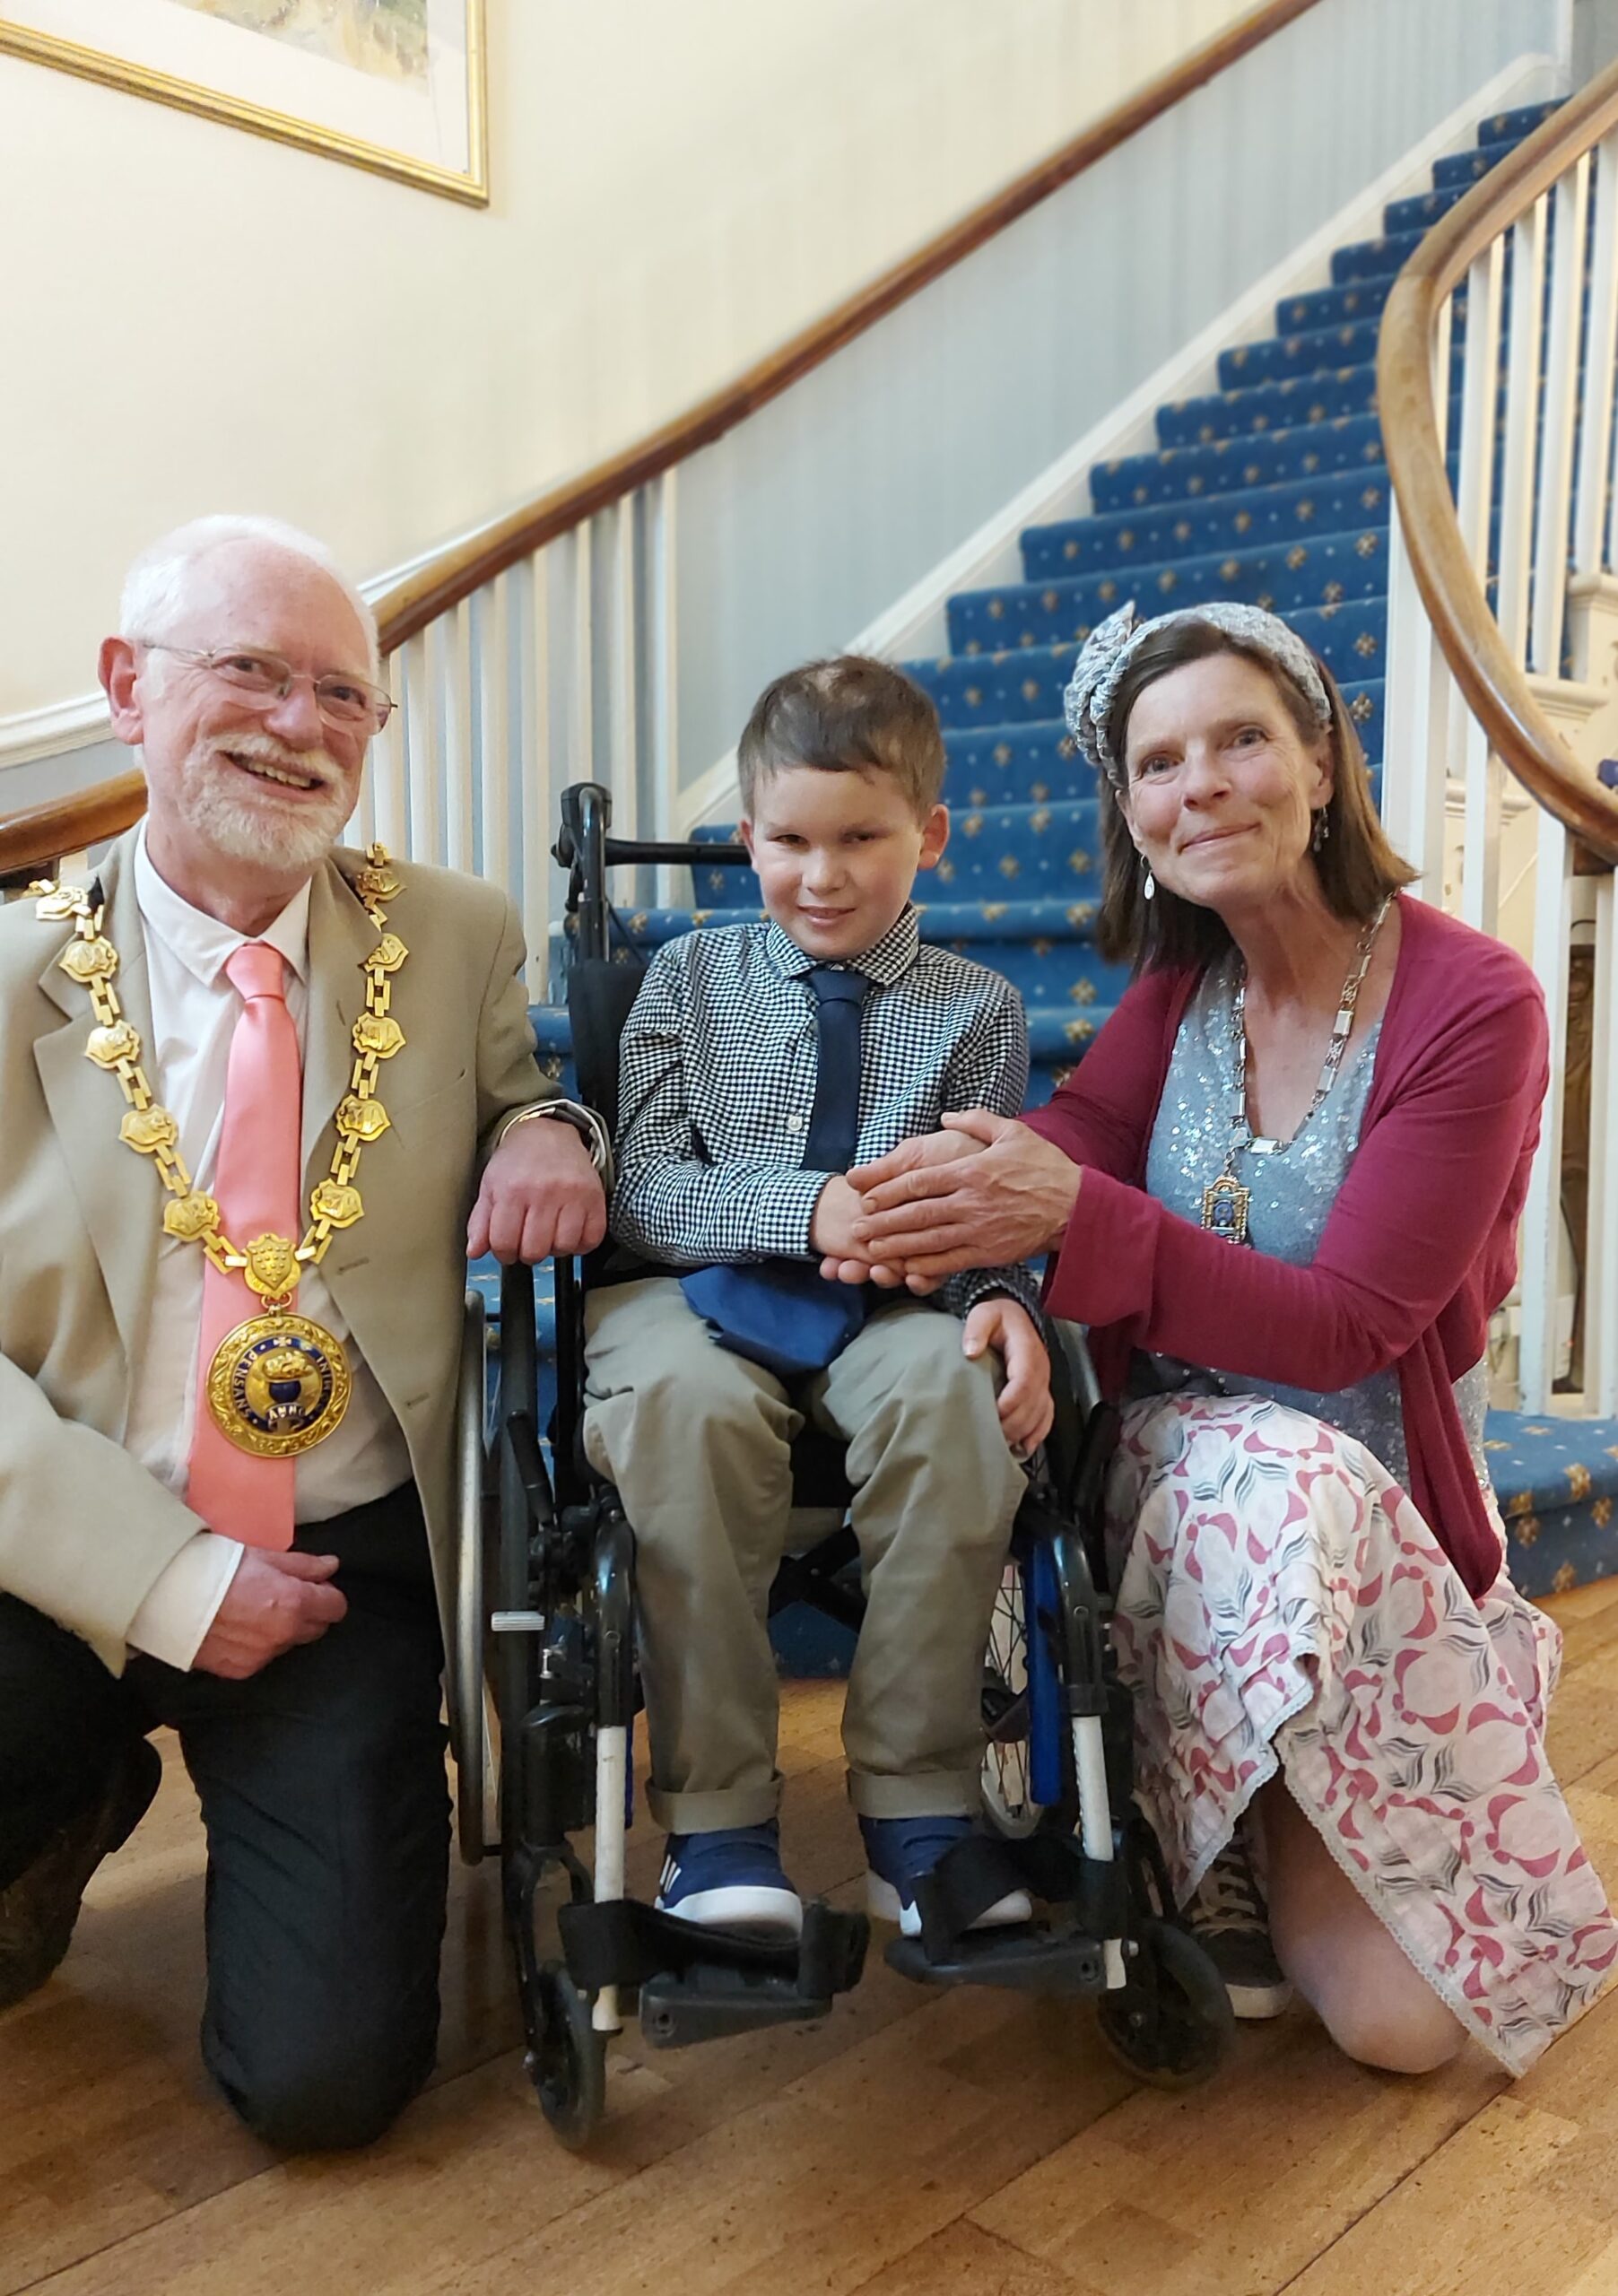 Young Citizen of the Year 2022 Elliott Furse with the Mayor of Penzance and the Mayor's Consort at the Queen's Hotel